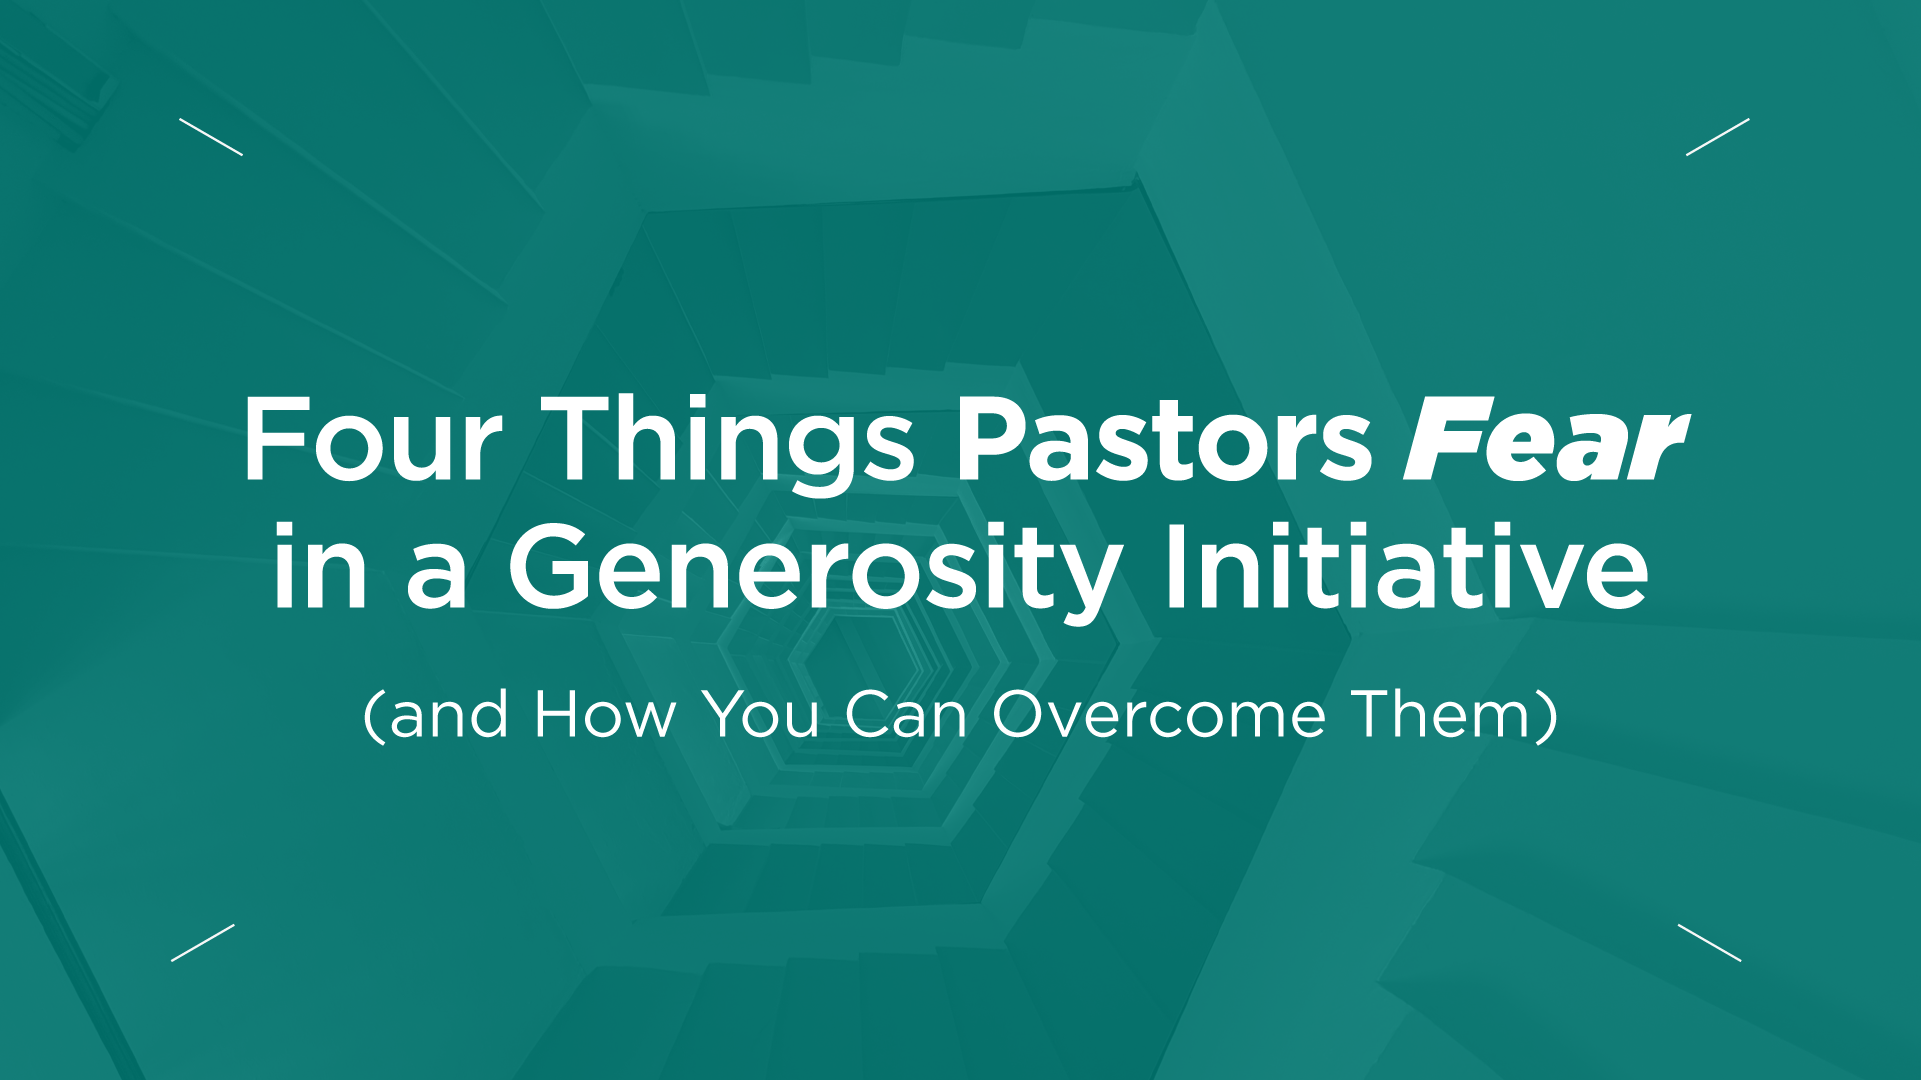 Four Things Pastors Fear in a Generosity Initiative (and How You Can Overcome Them)